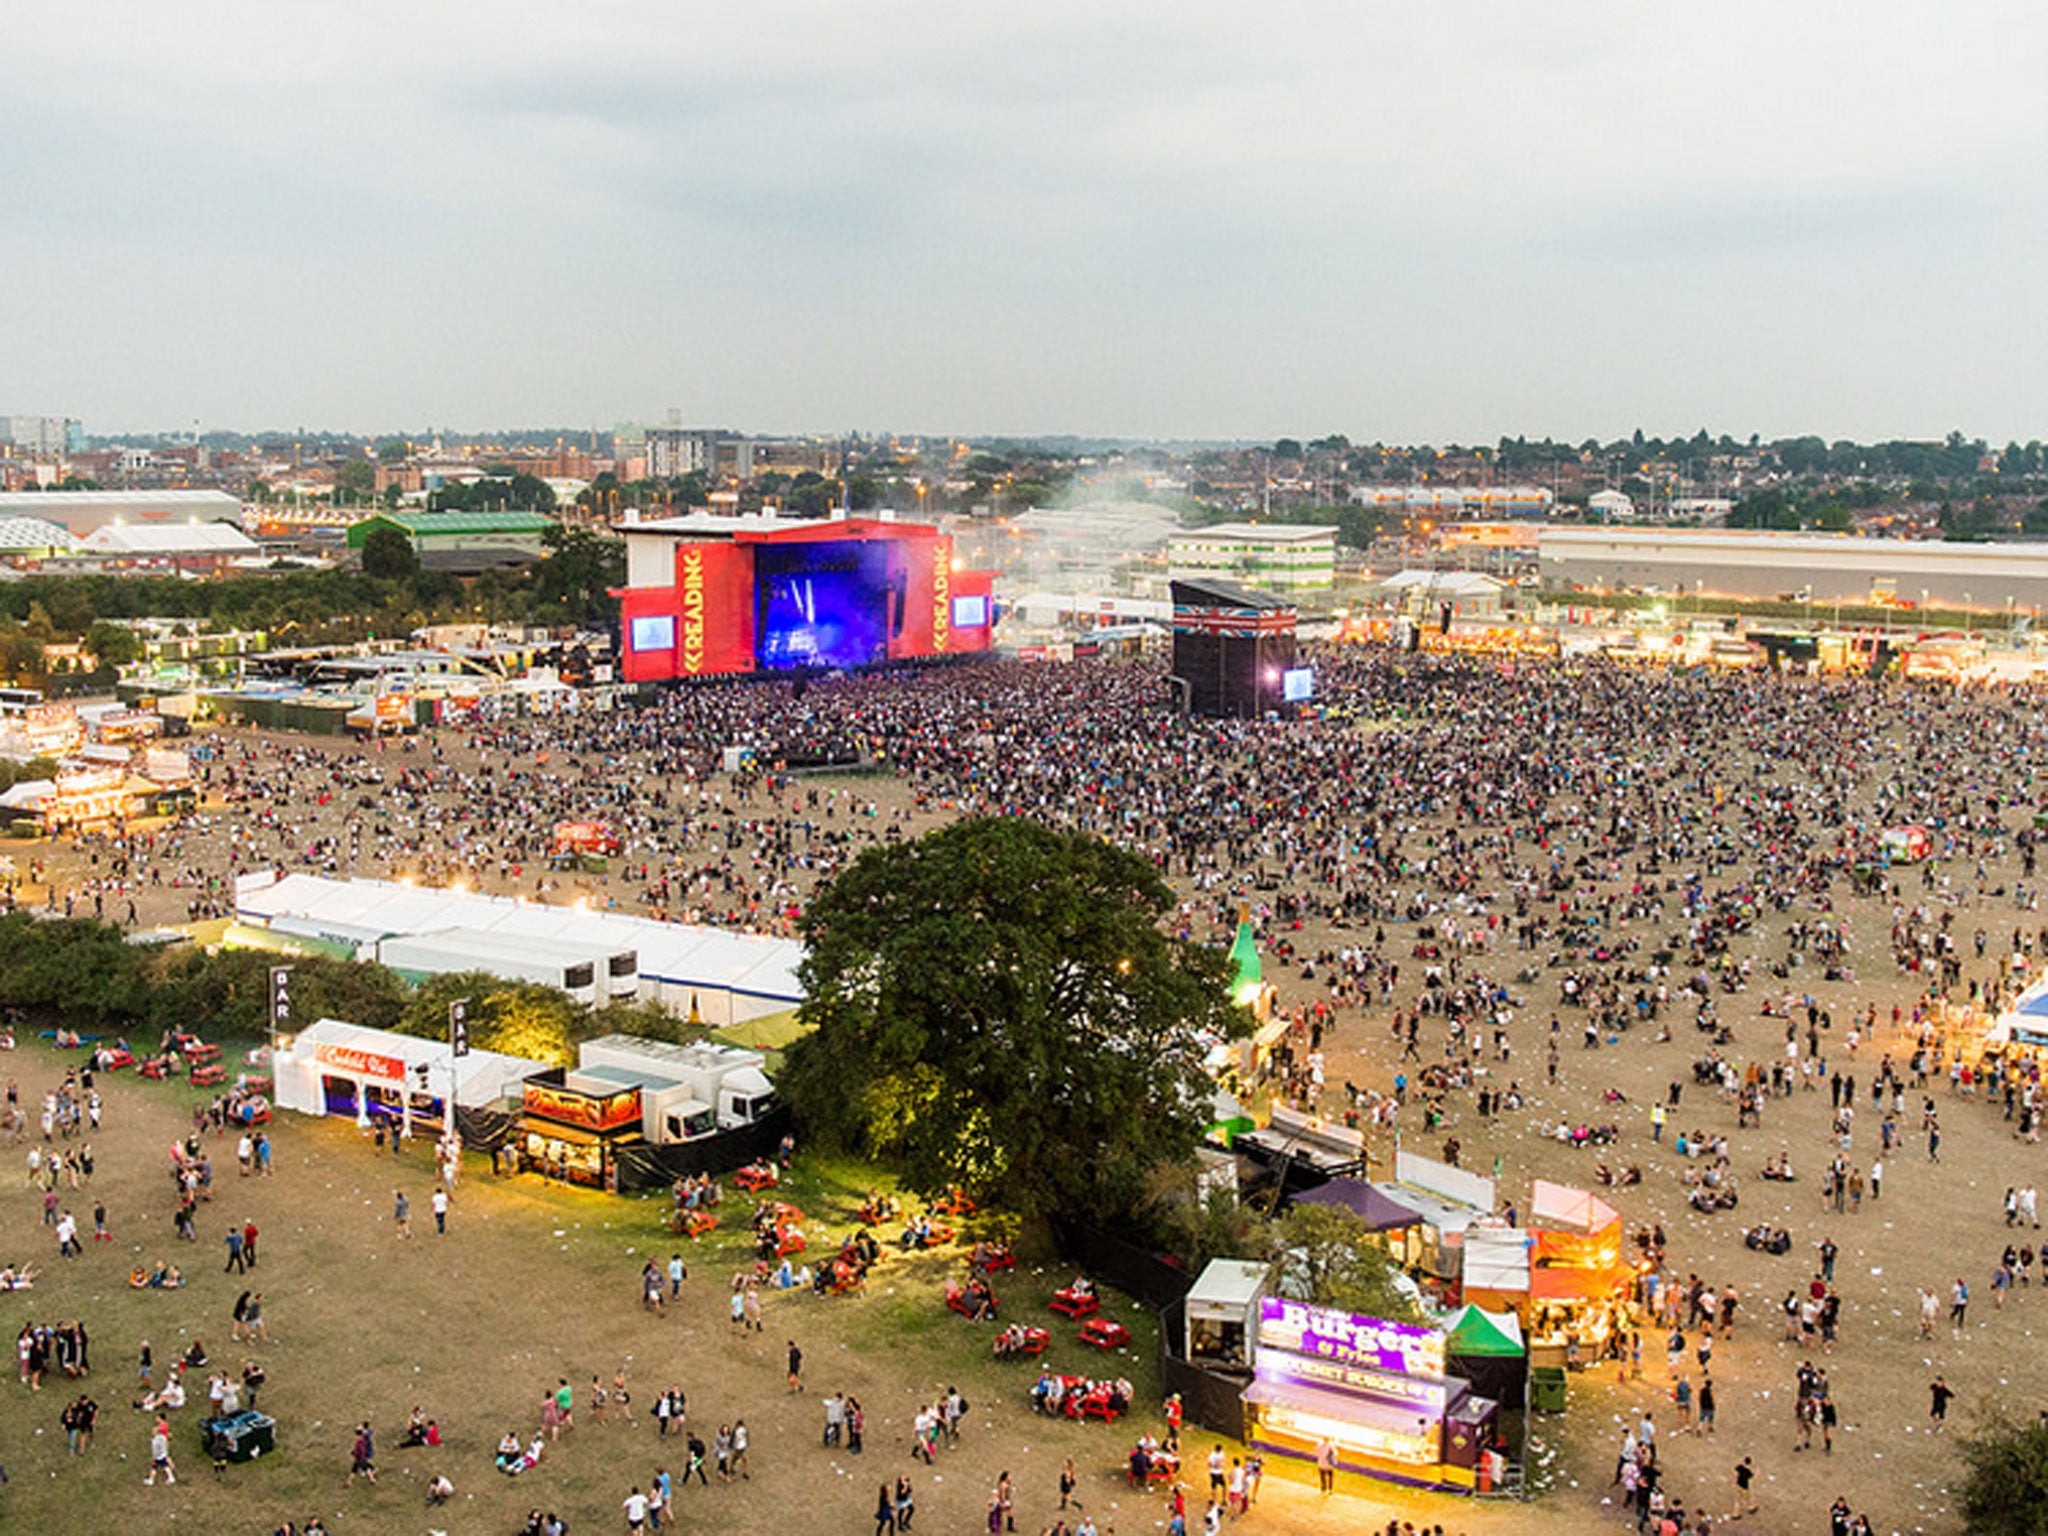 Crowds gather to watch a main stage performance at Reading Festival